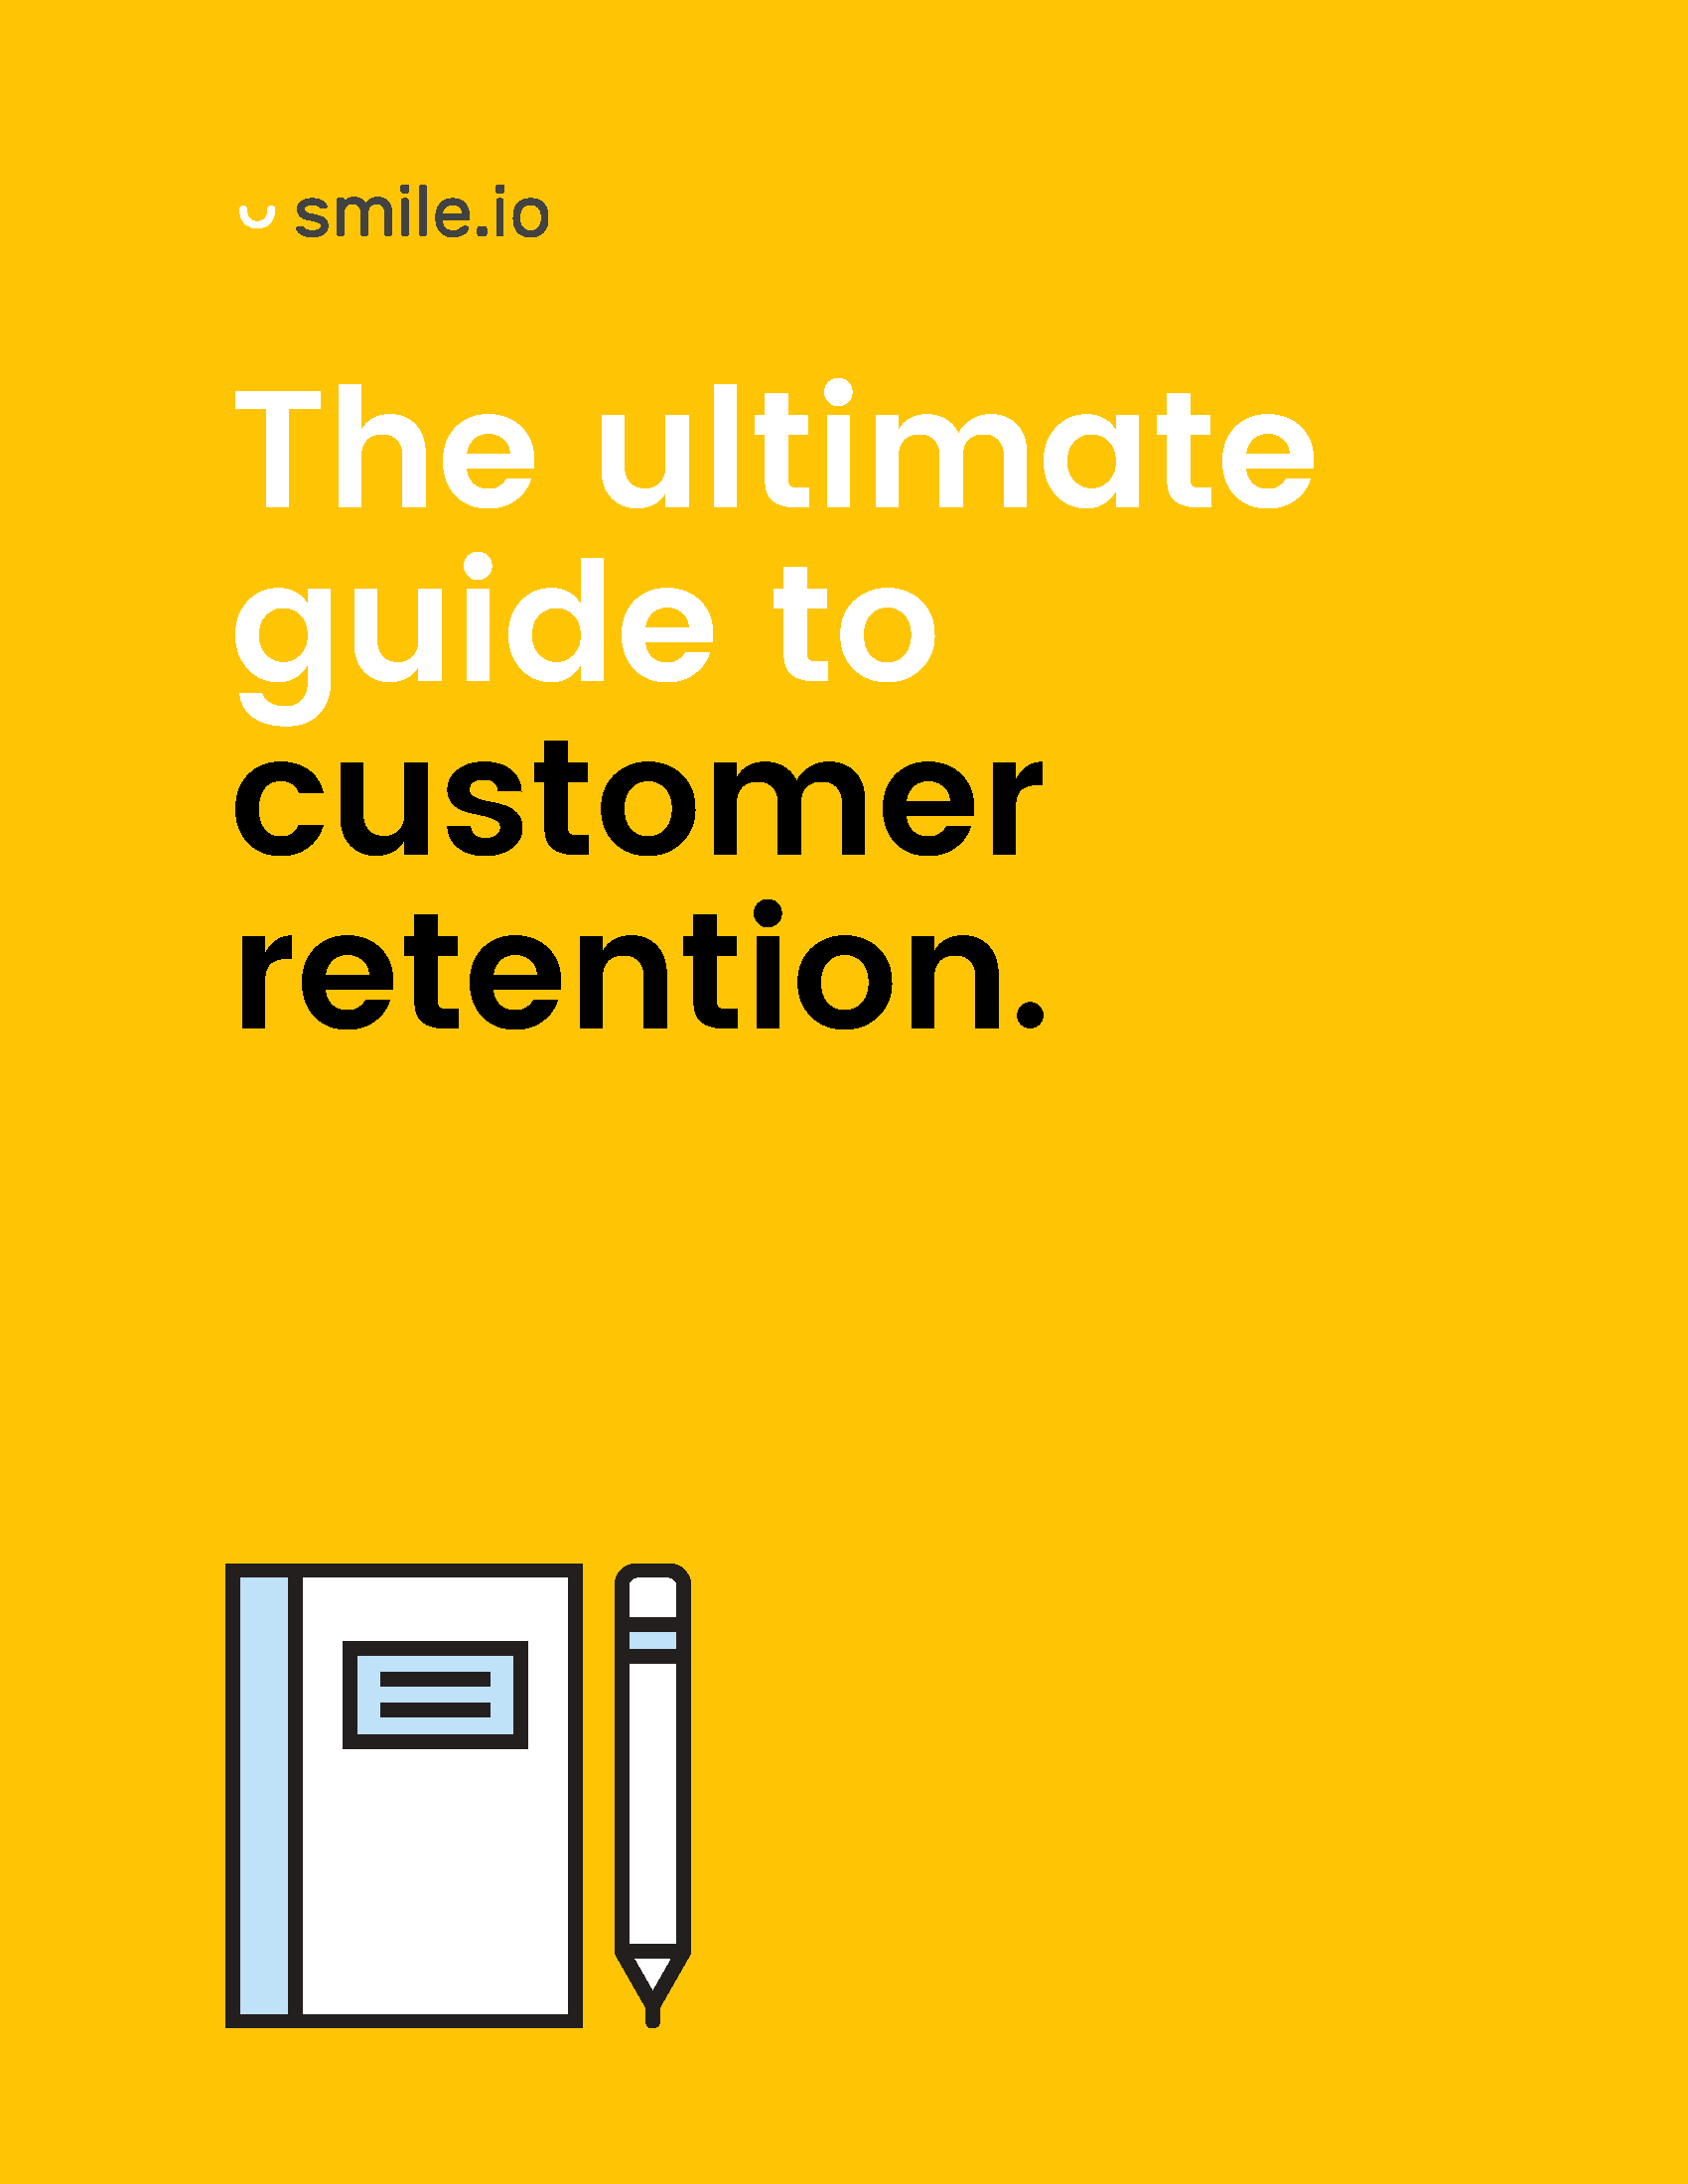 The Ultimate Guide to Customer Retention